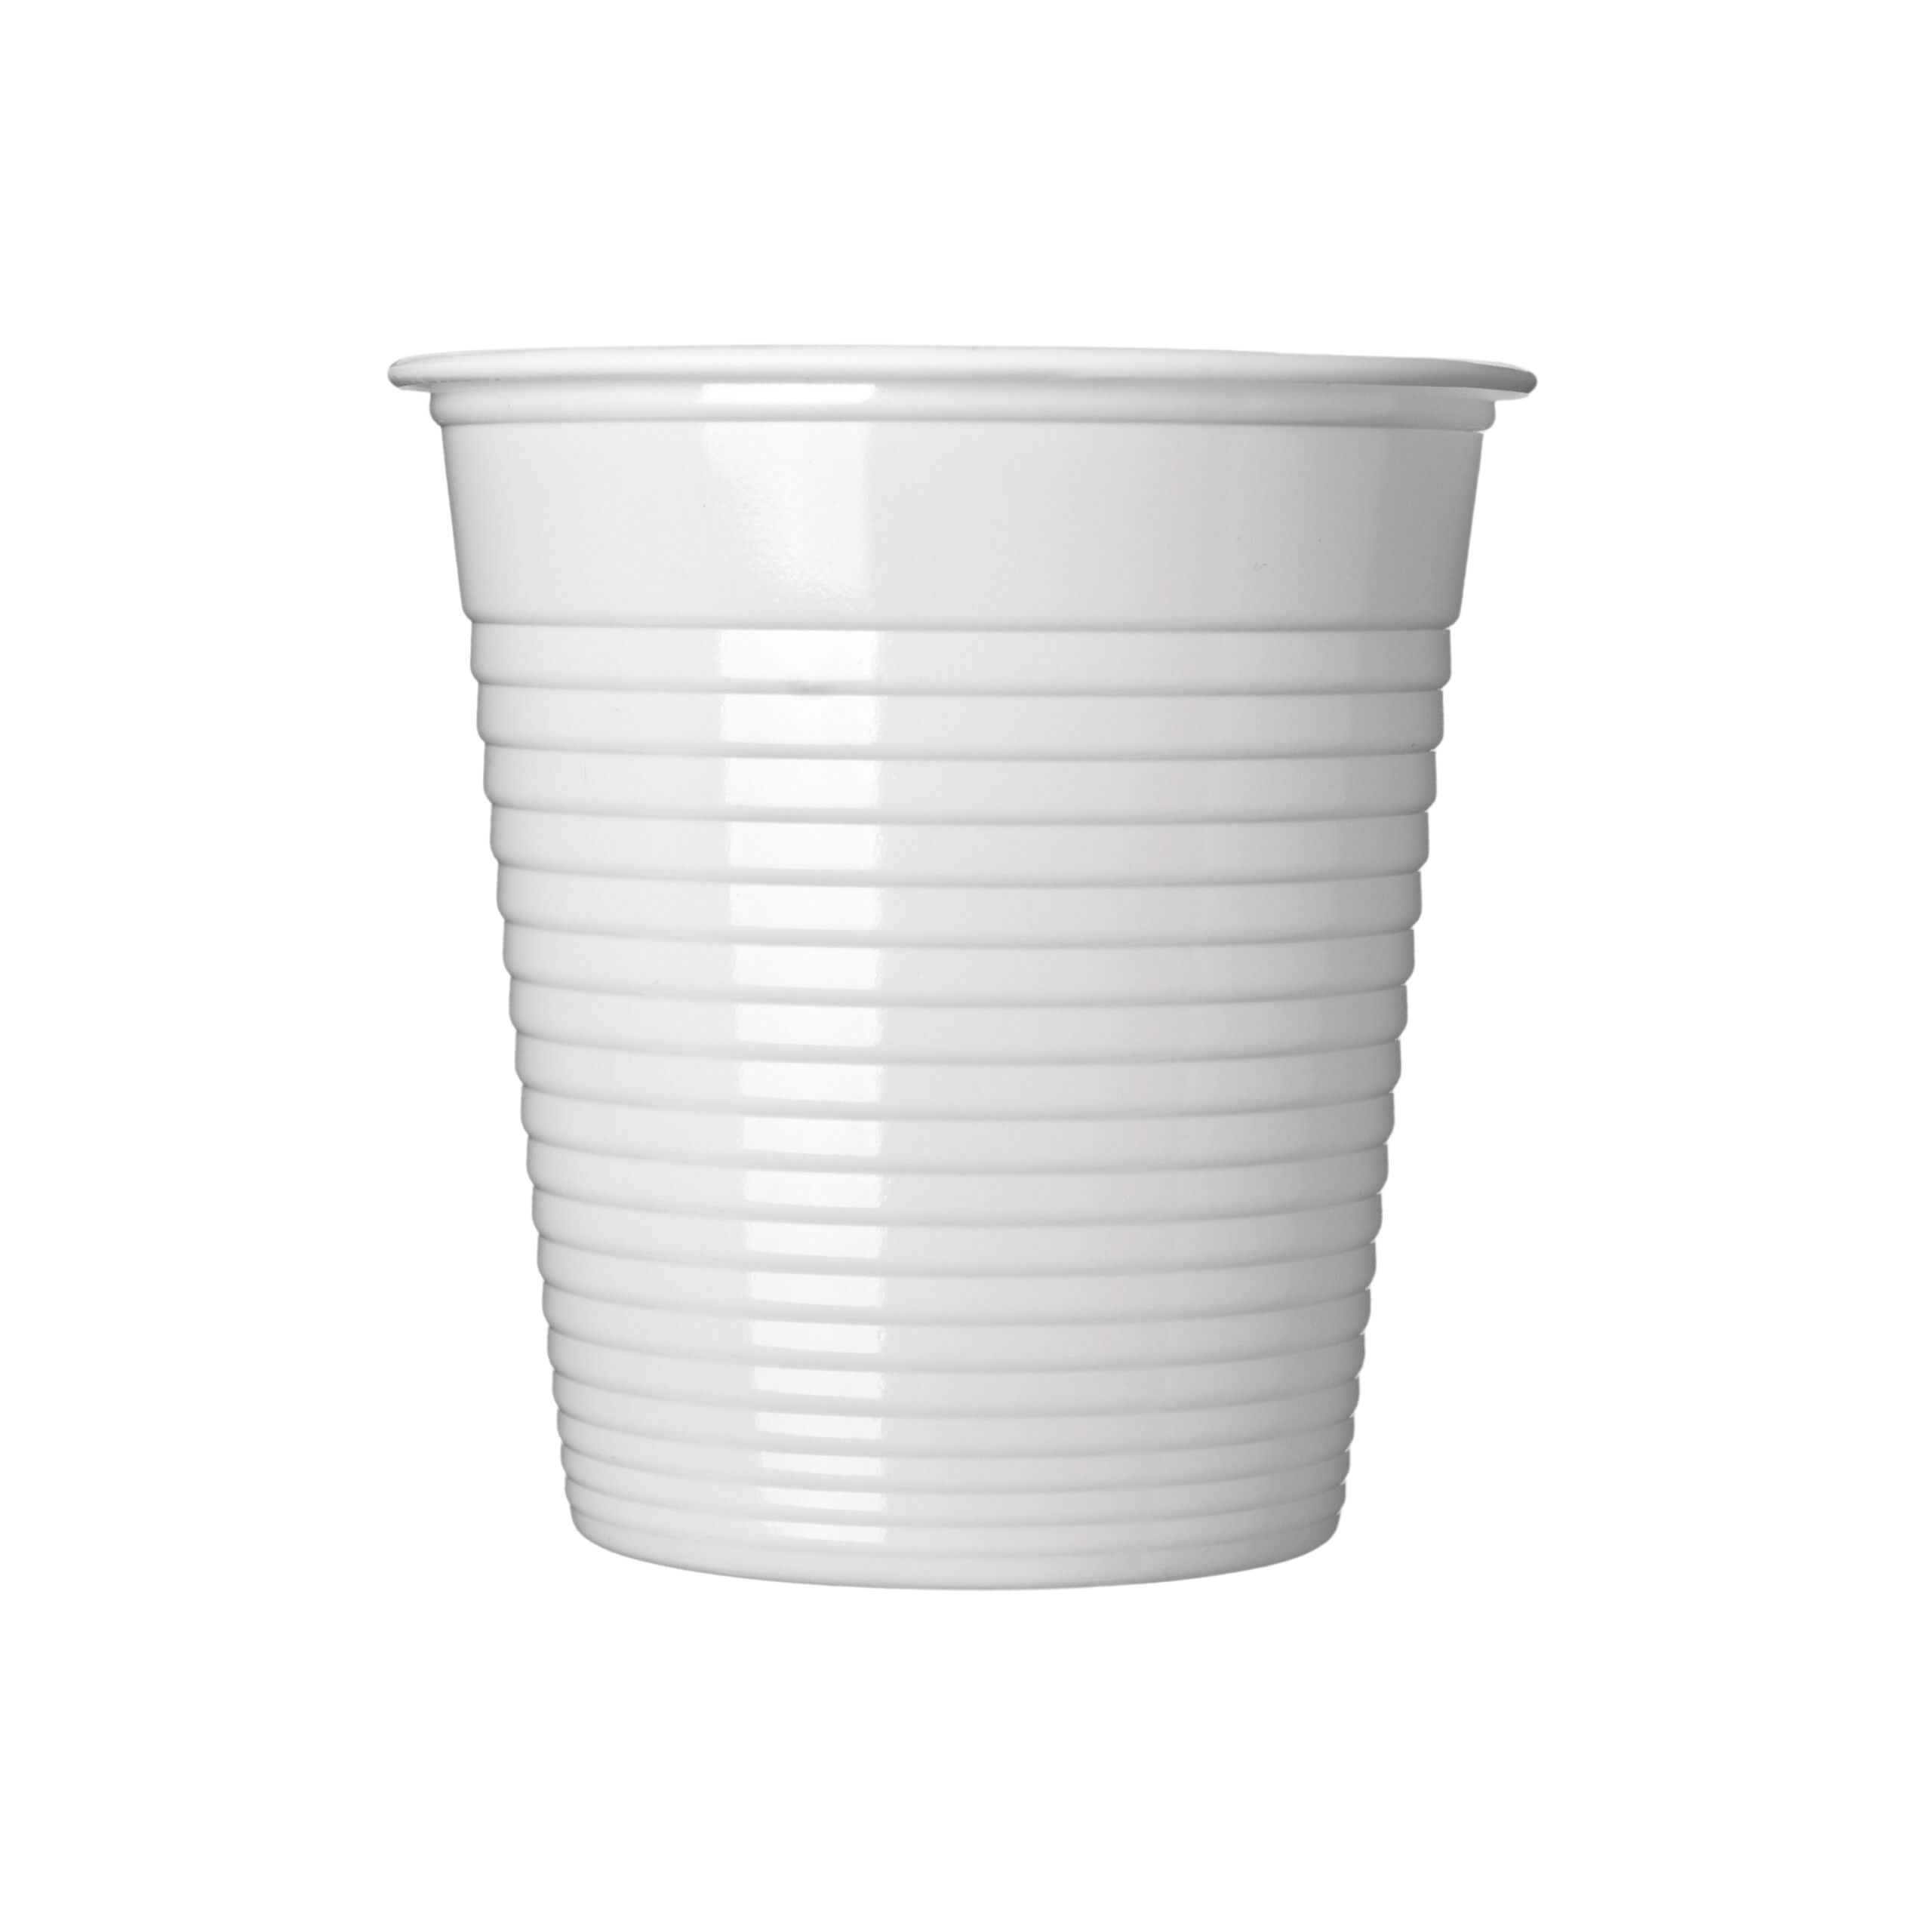 An image of a Disposable Plastic Cup.